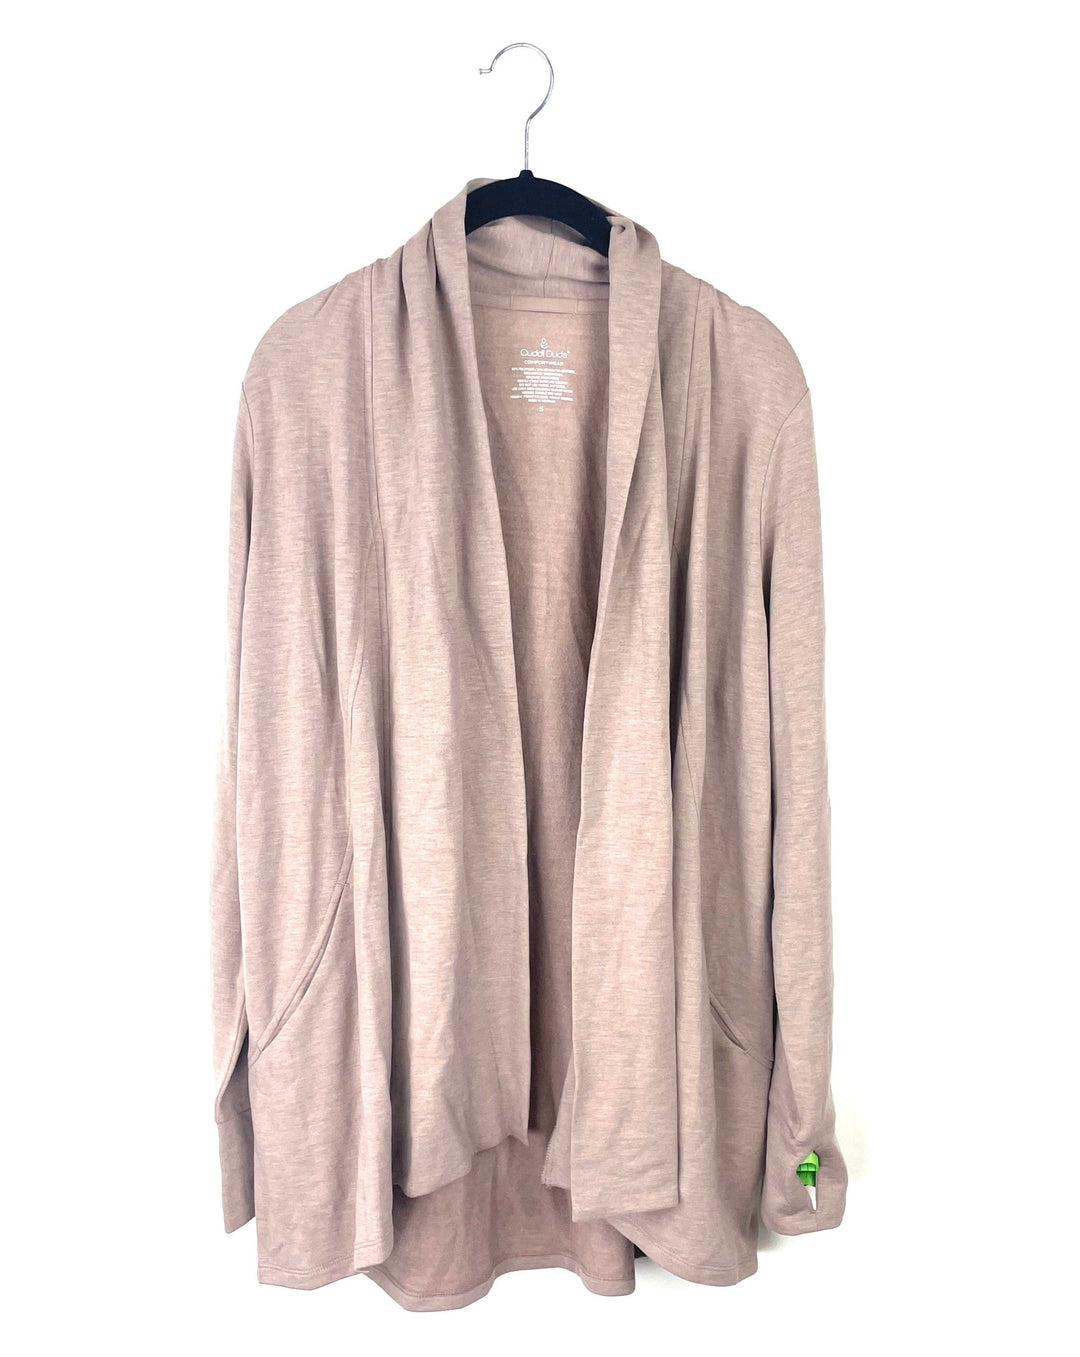 Light Brown Open Cardigan - Size 6/8